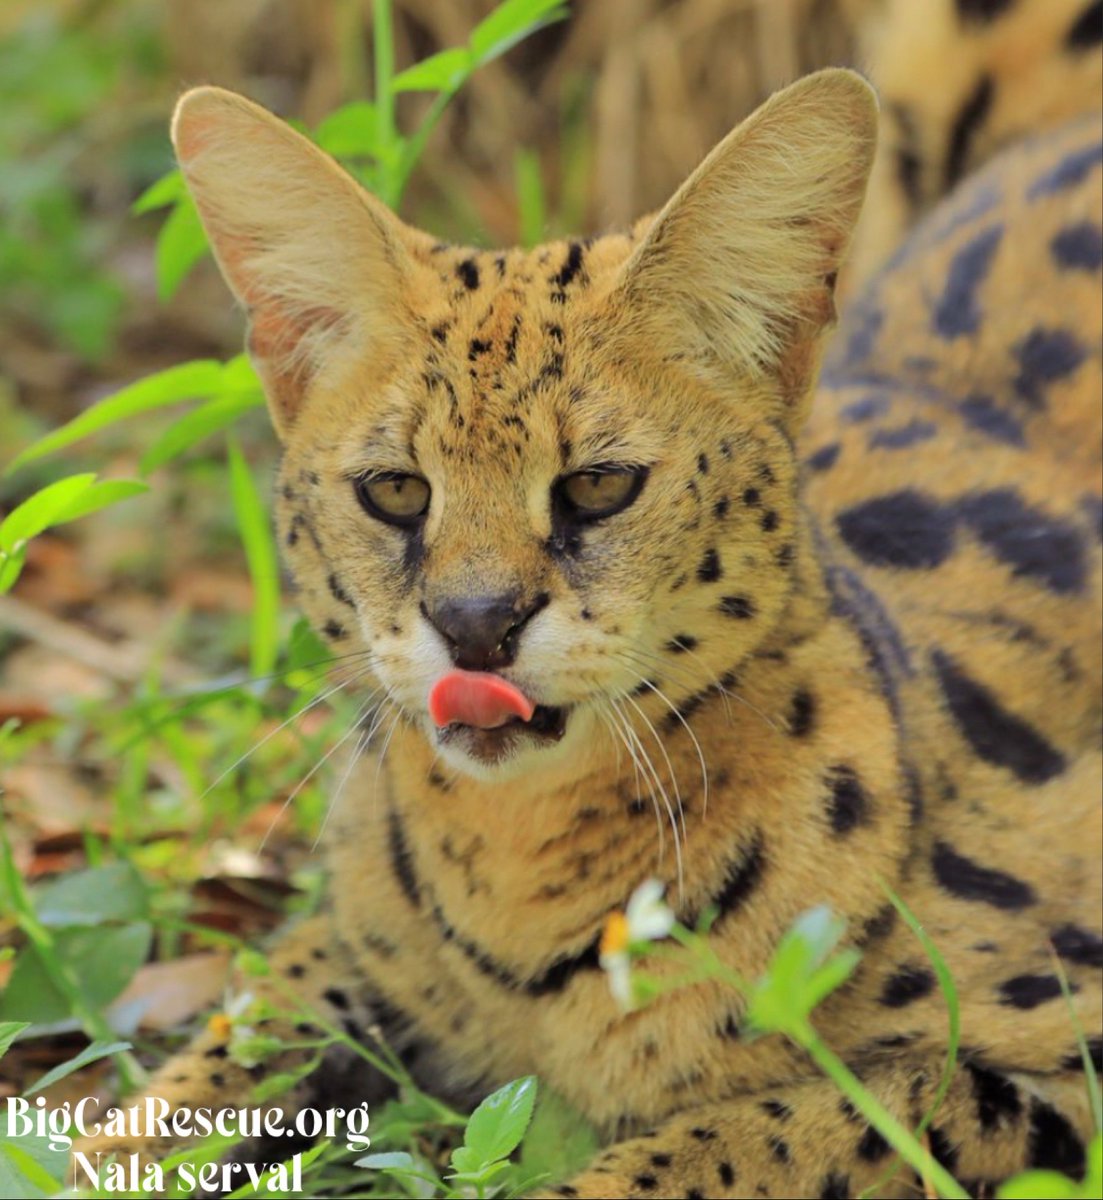 Good night Big Cat Rescue Friends! 🌙
Nala serval tell us how you really feel about it only being Wednesday?! 

#GoodNight #BigCats #Rescue #Serval #WednesdayNight #HumpDayWednesday #FunnyMoments #CaroleBaskin